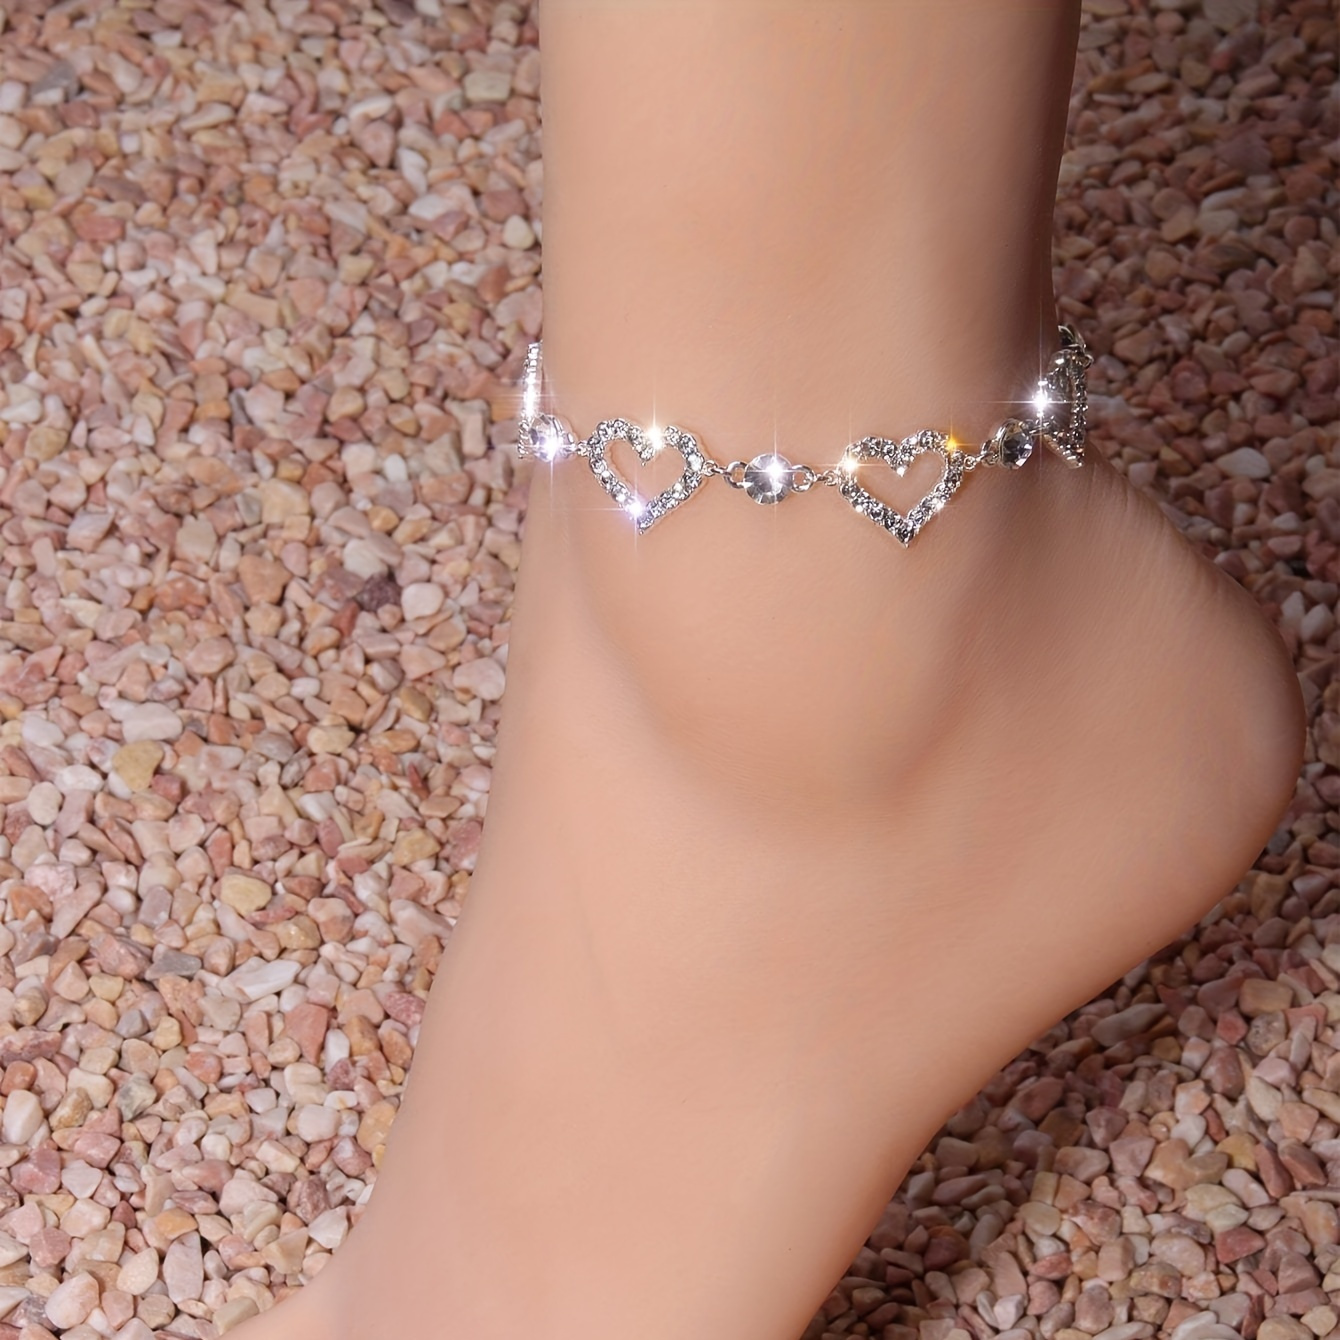 

Y2k Style Hollow Heart Chain Anklet Full Of Shiny Rhinestones Adjustable Ankle Bracelet